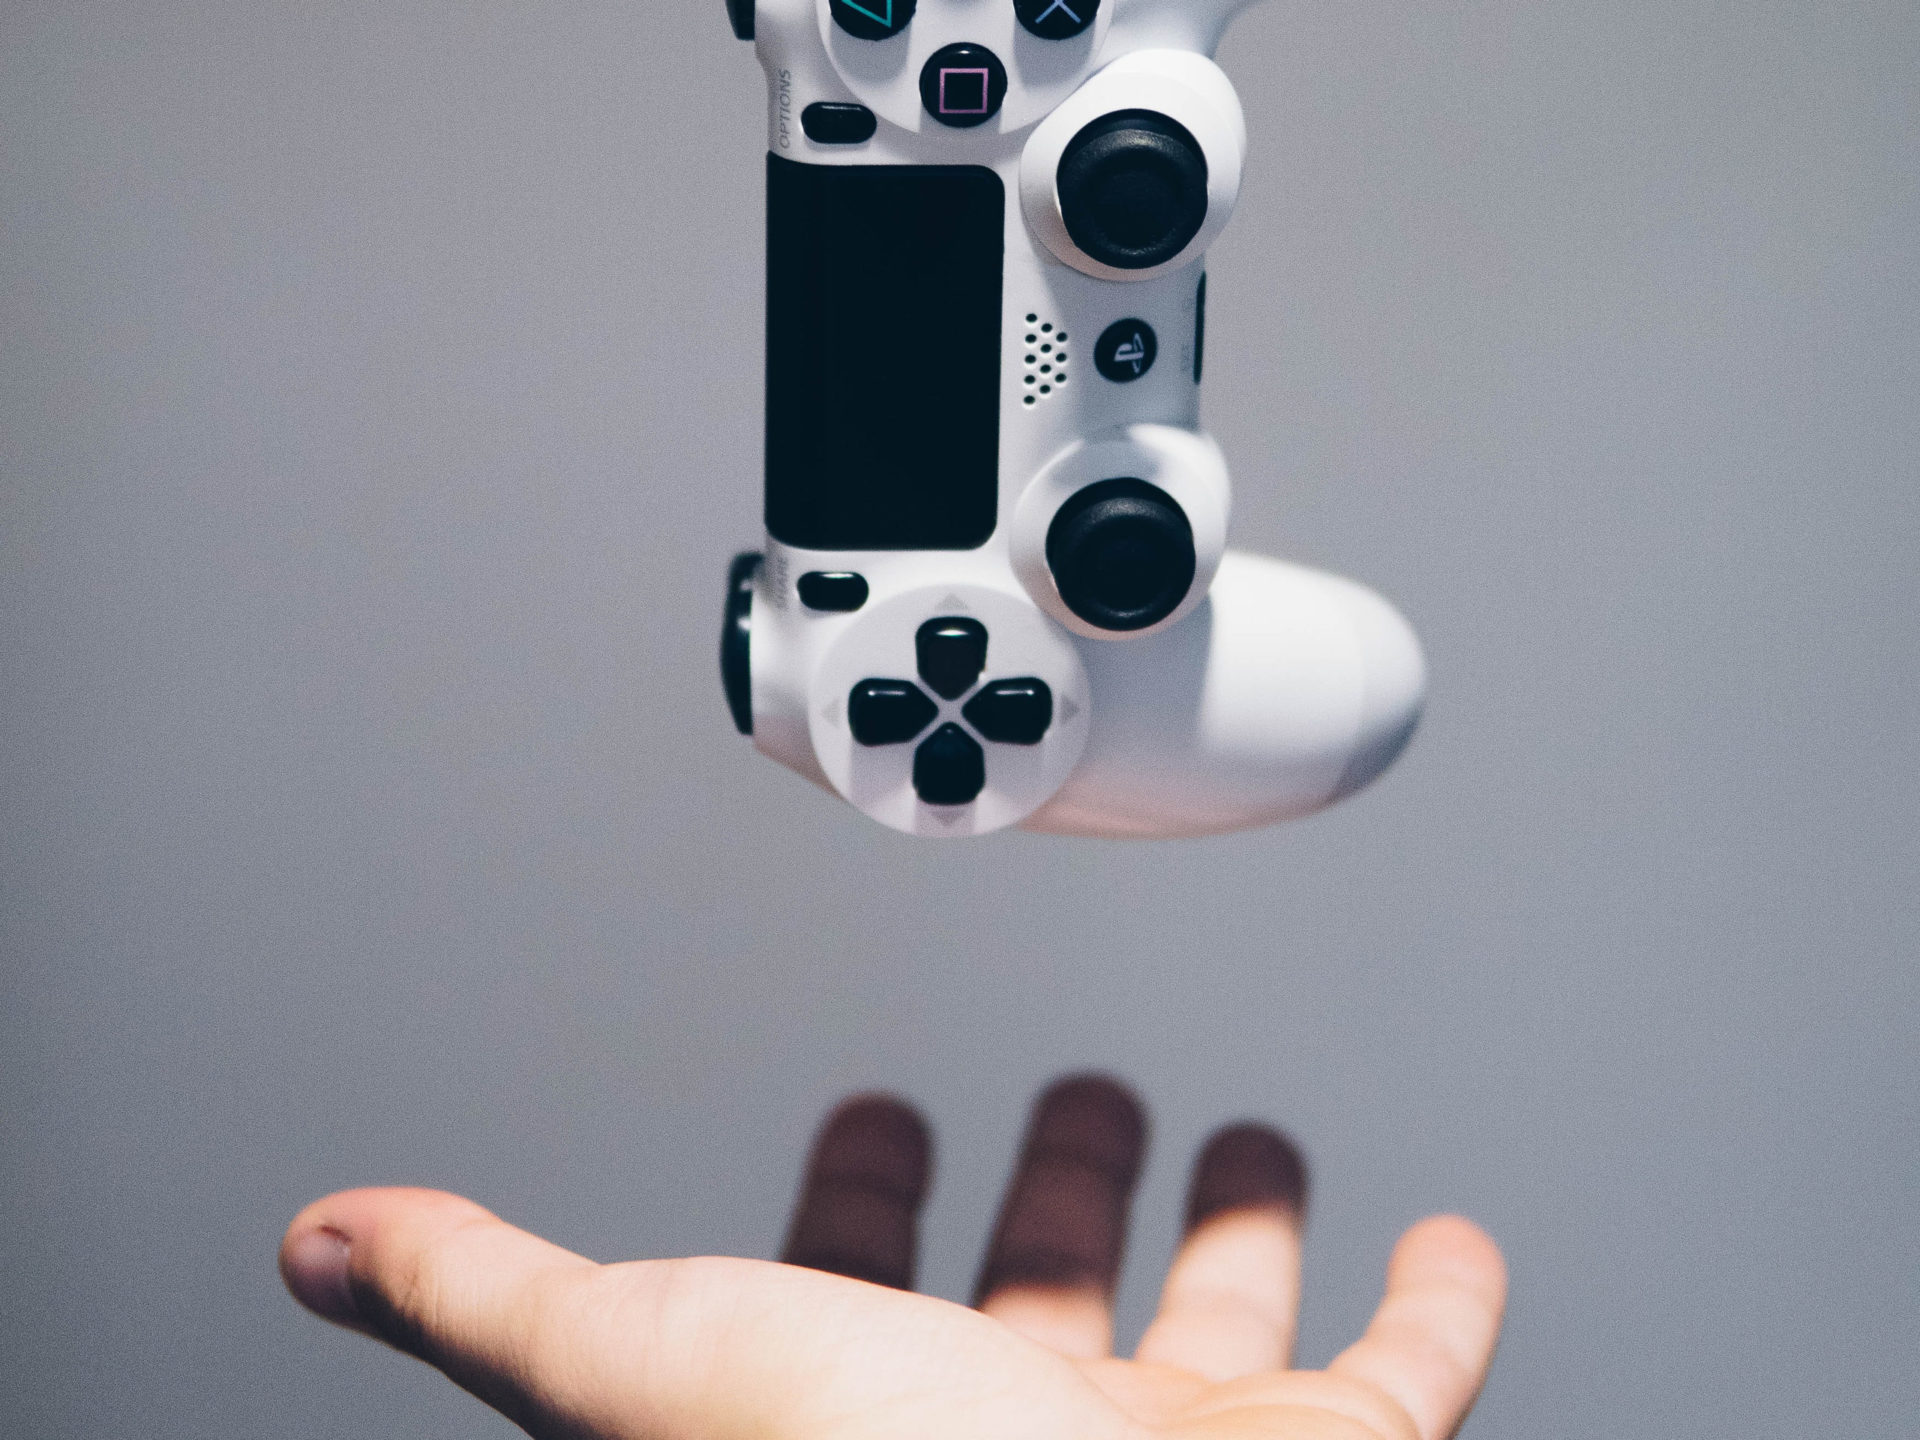 A hand outstretched ready to catch a Playstation 4 controller that is falling back into the frame